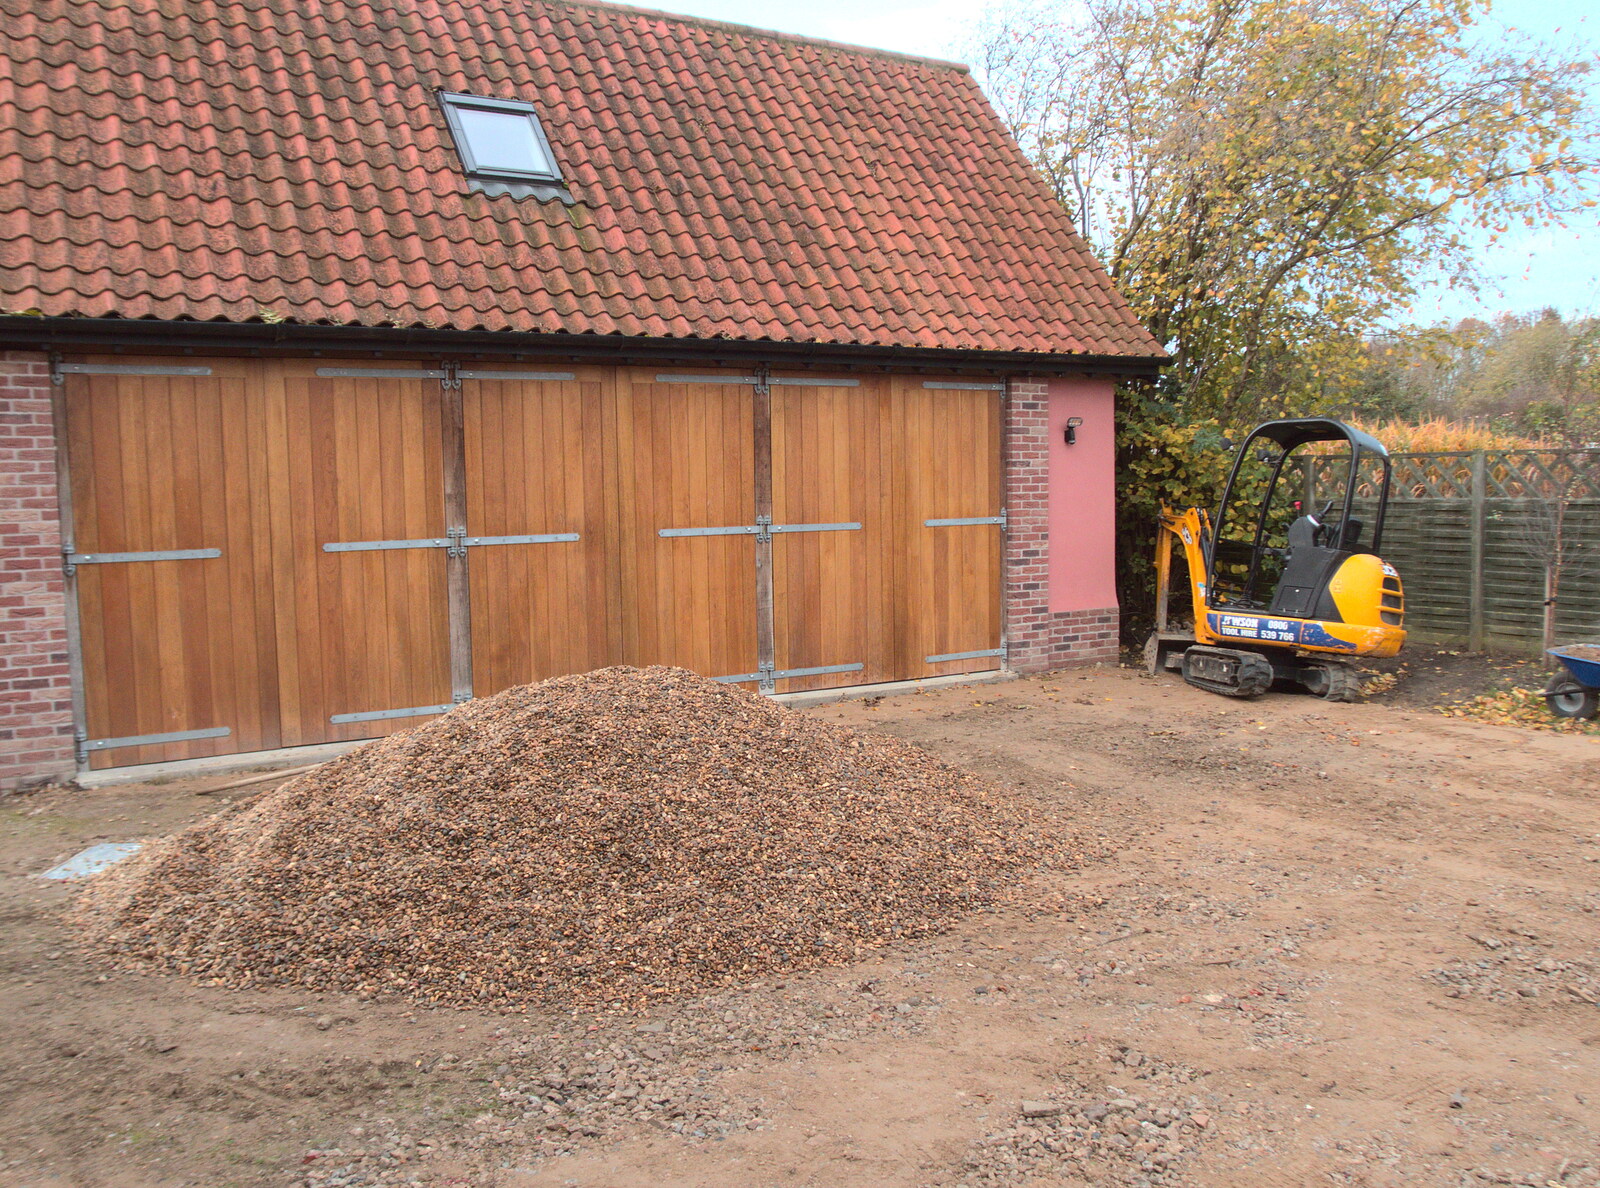 There's a few tons of gravel ready to spread out from Suey Leaves Aspall, The Oaksmere, Brome, Suffolk - 16th November 2018